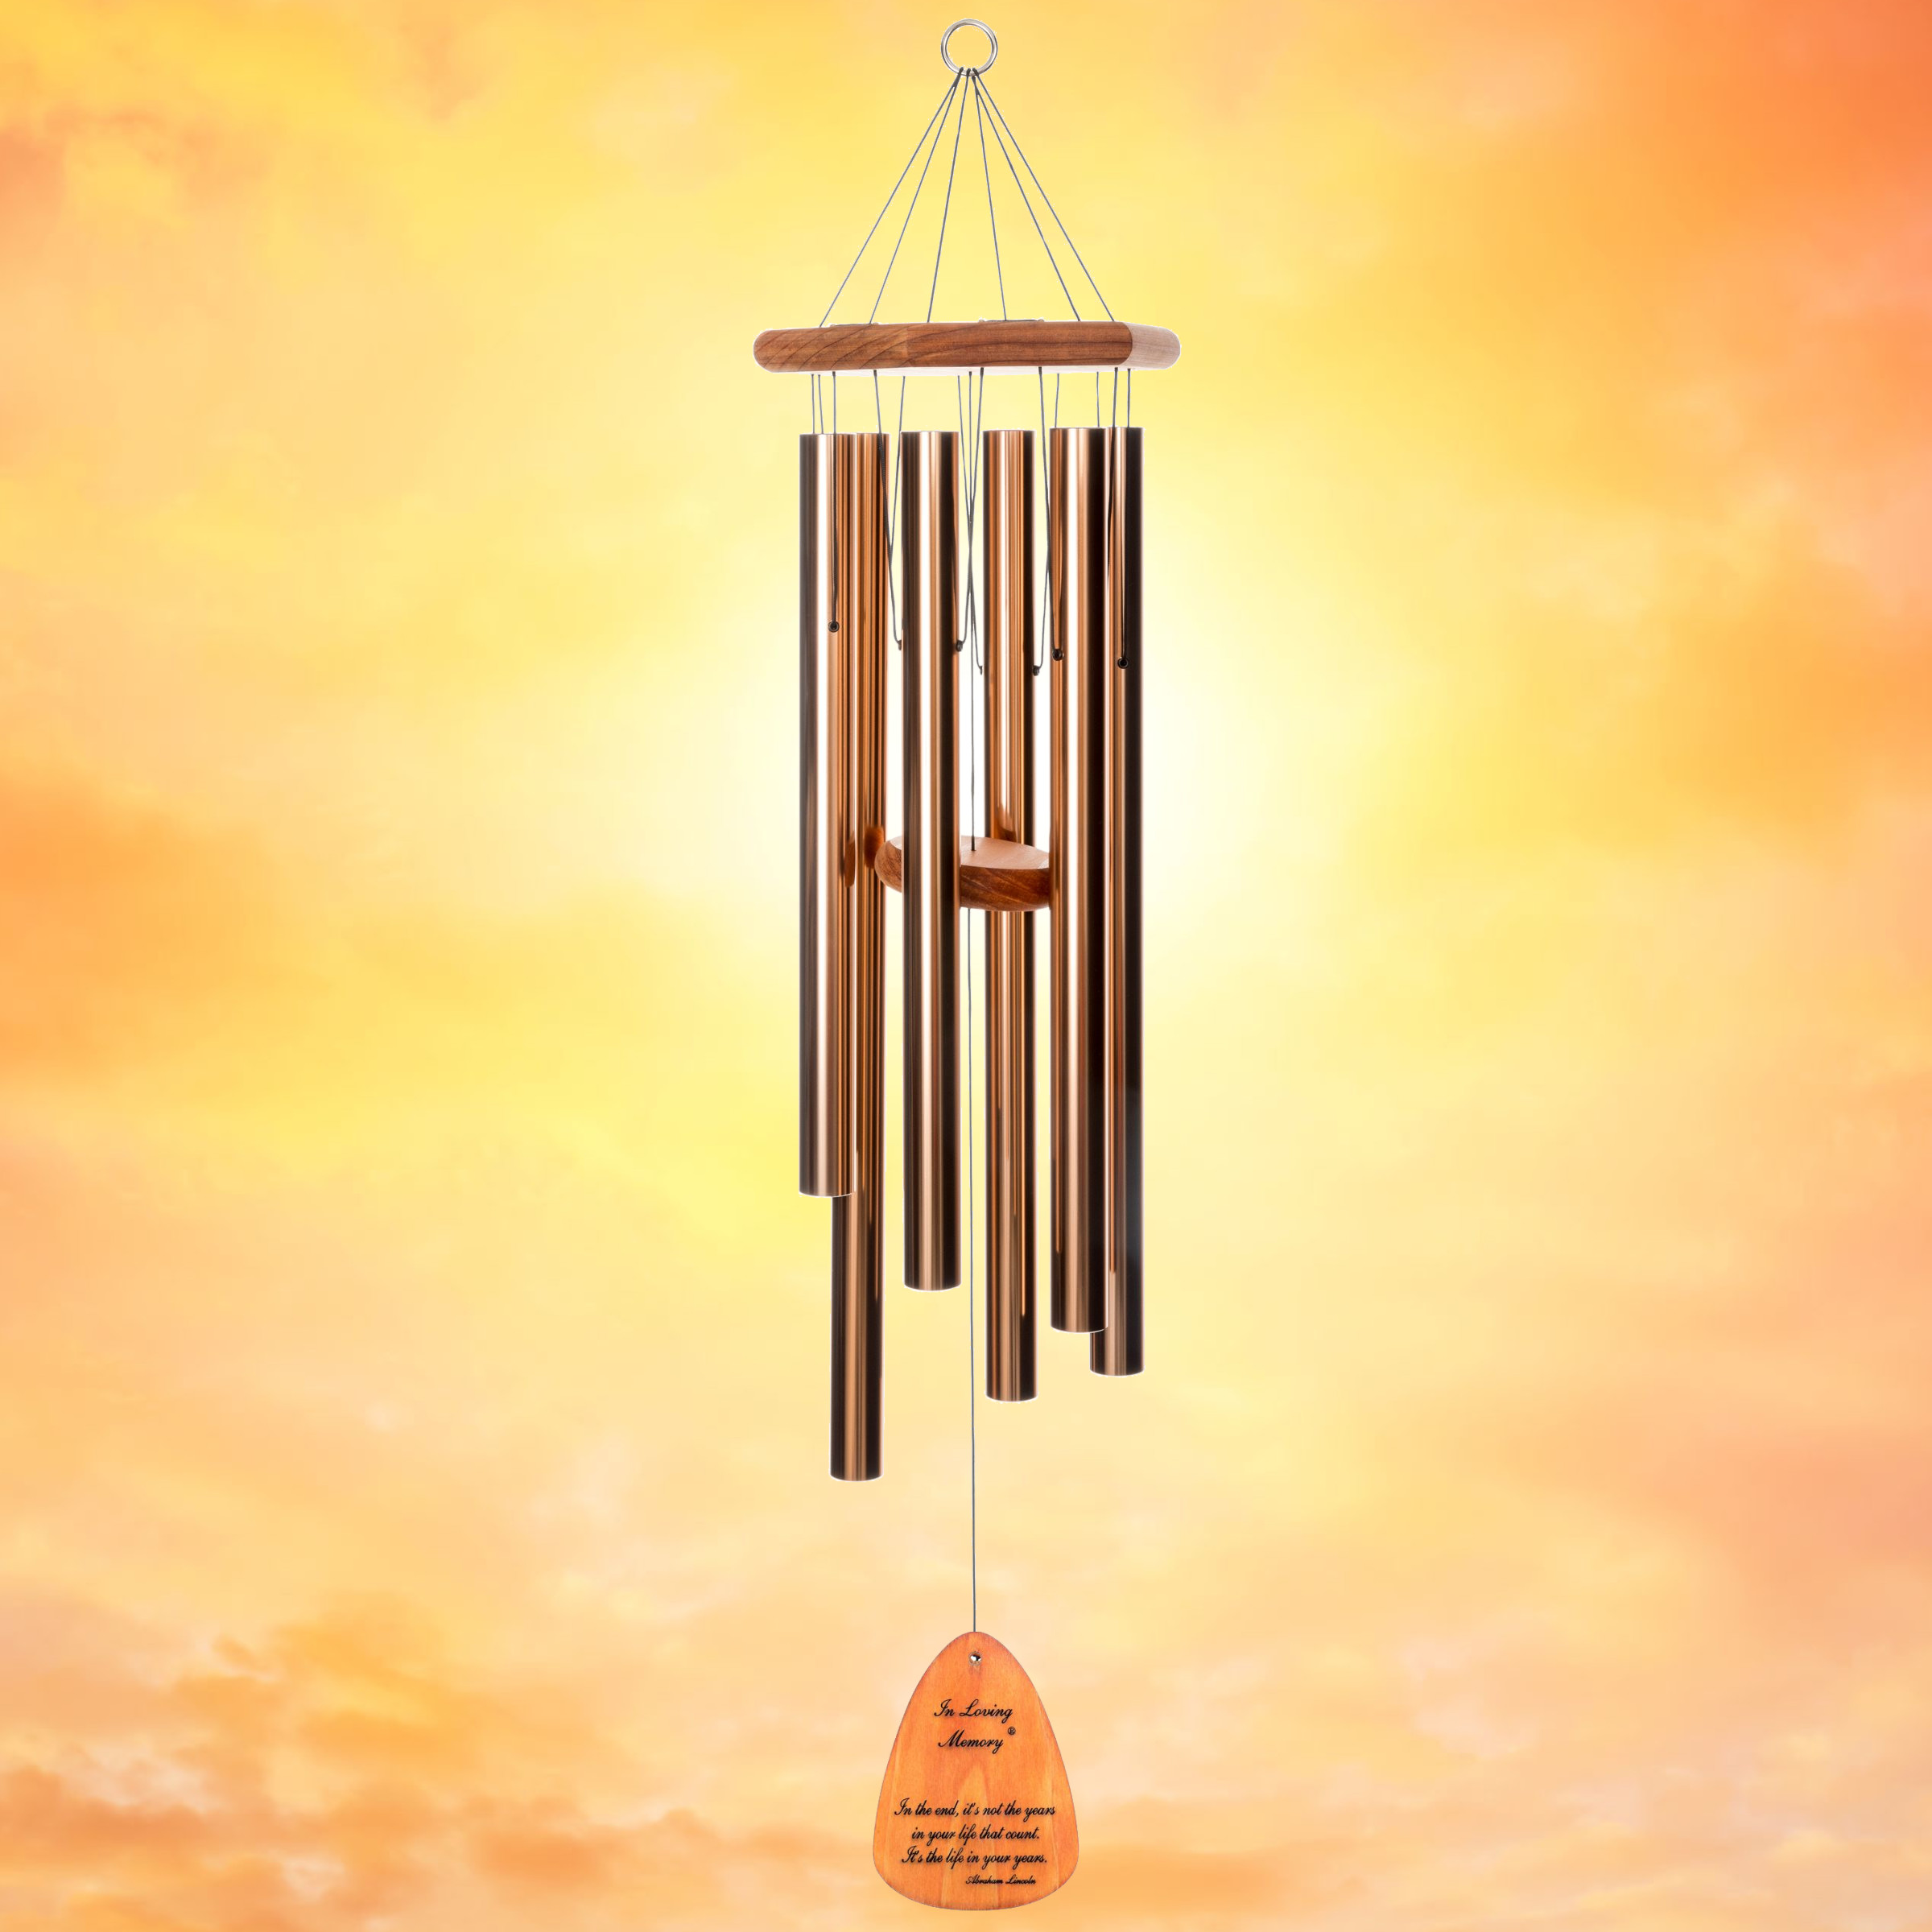 In Loving Memory 35 Inch Windchime - In the end, it's not the years in Bronze